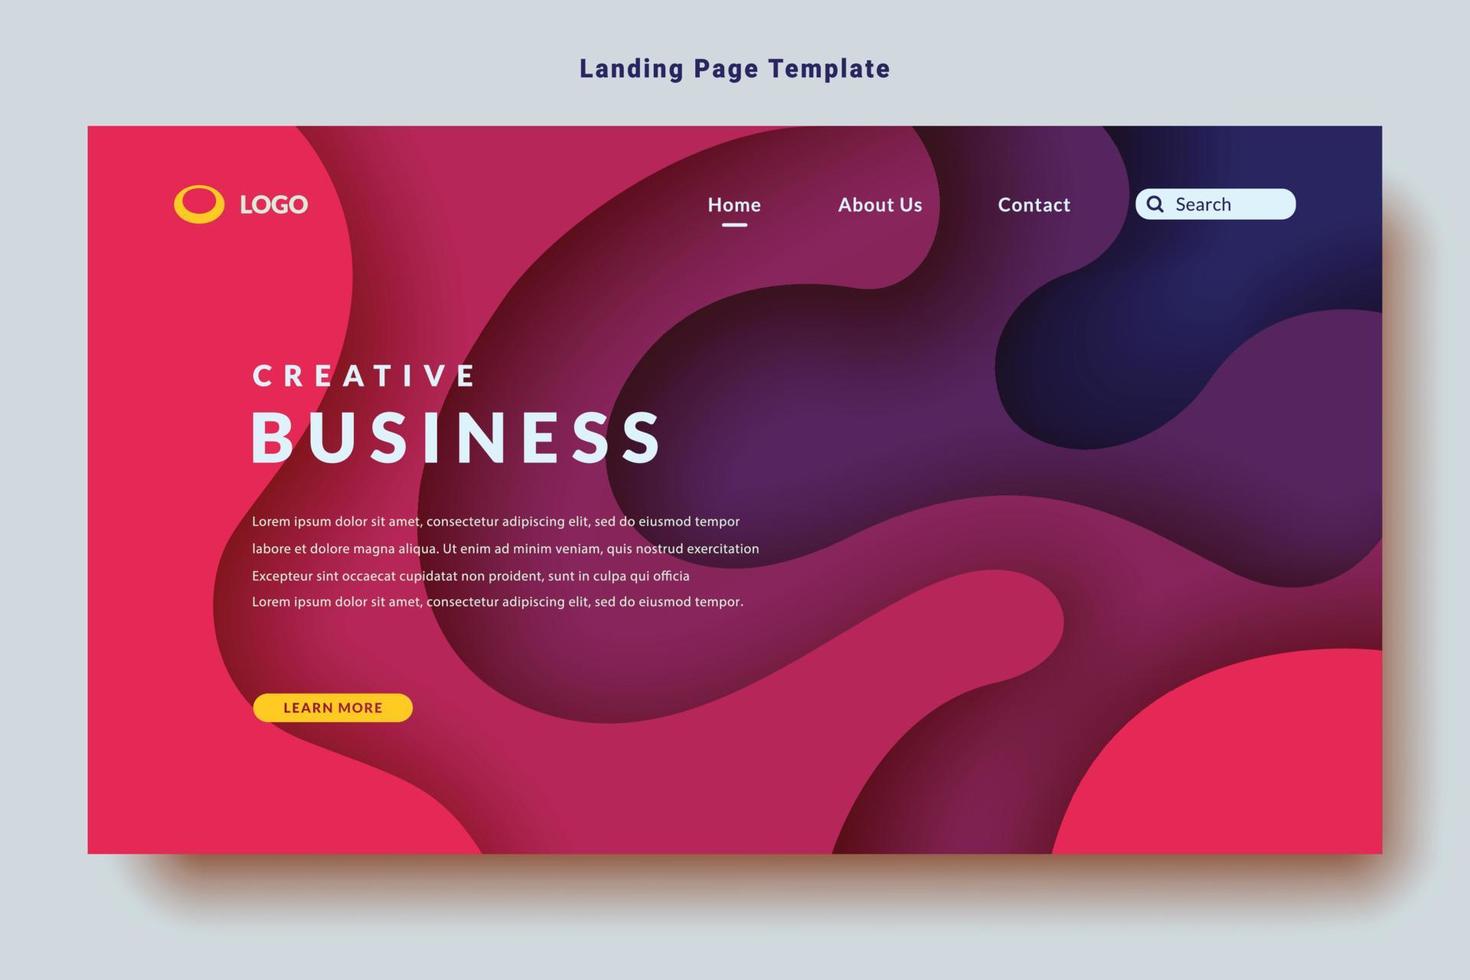 modern colorful landing page website template design background, violet color, abstract layered paper texture style vector graphic